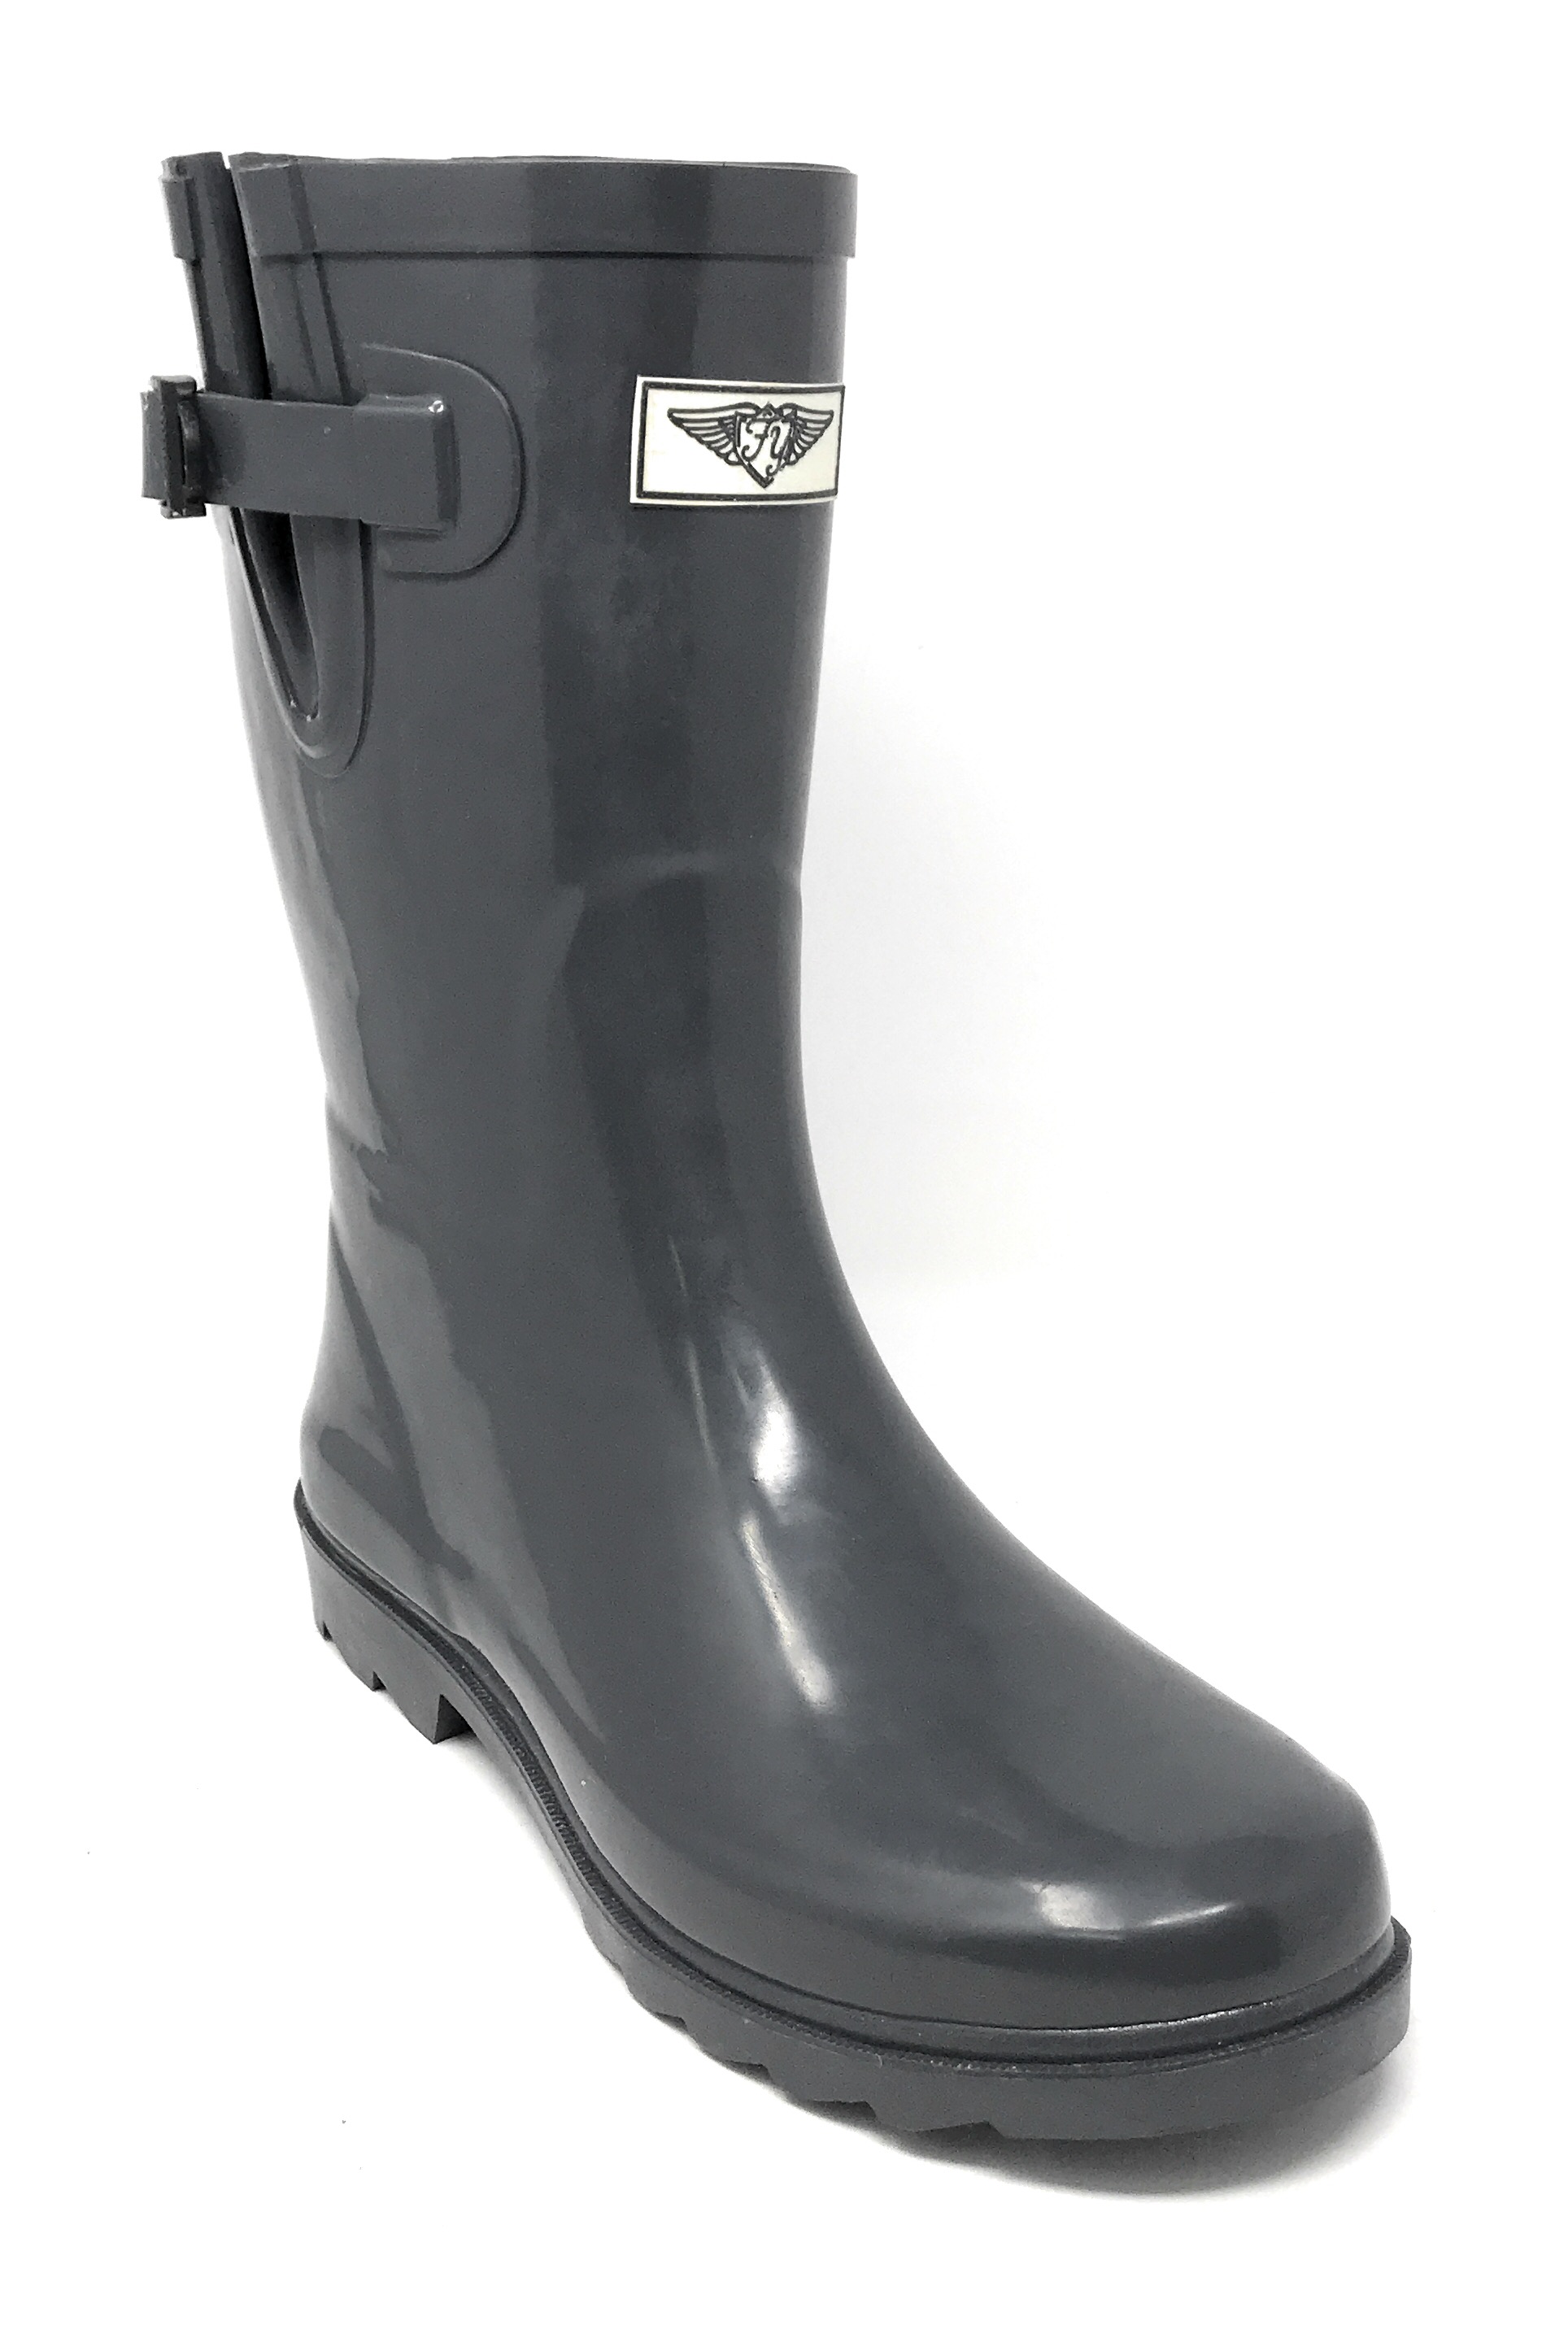 Forever Young Women's Short Shaft Rain Boots - image 1 of 5